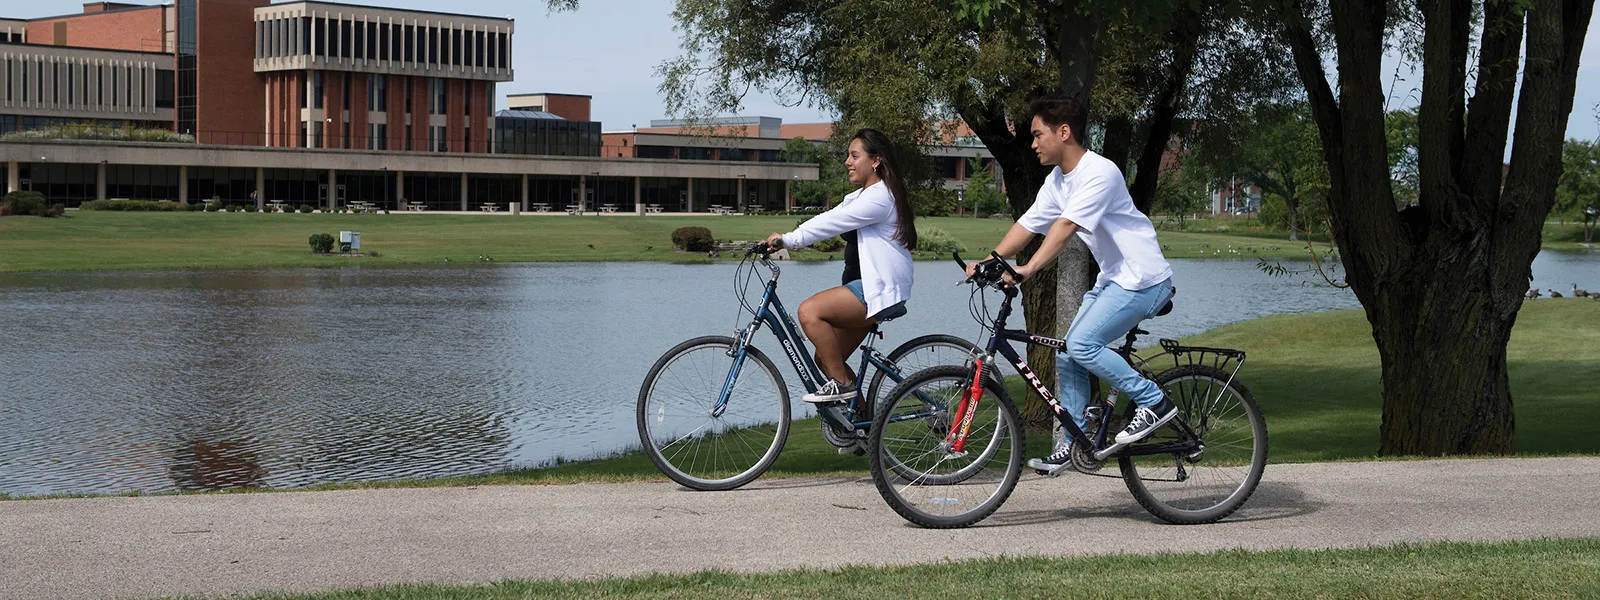 two people riding bikes on the Elgin Community Campus